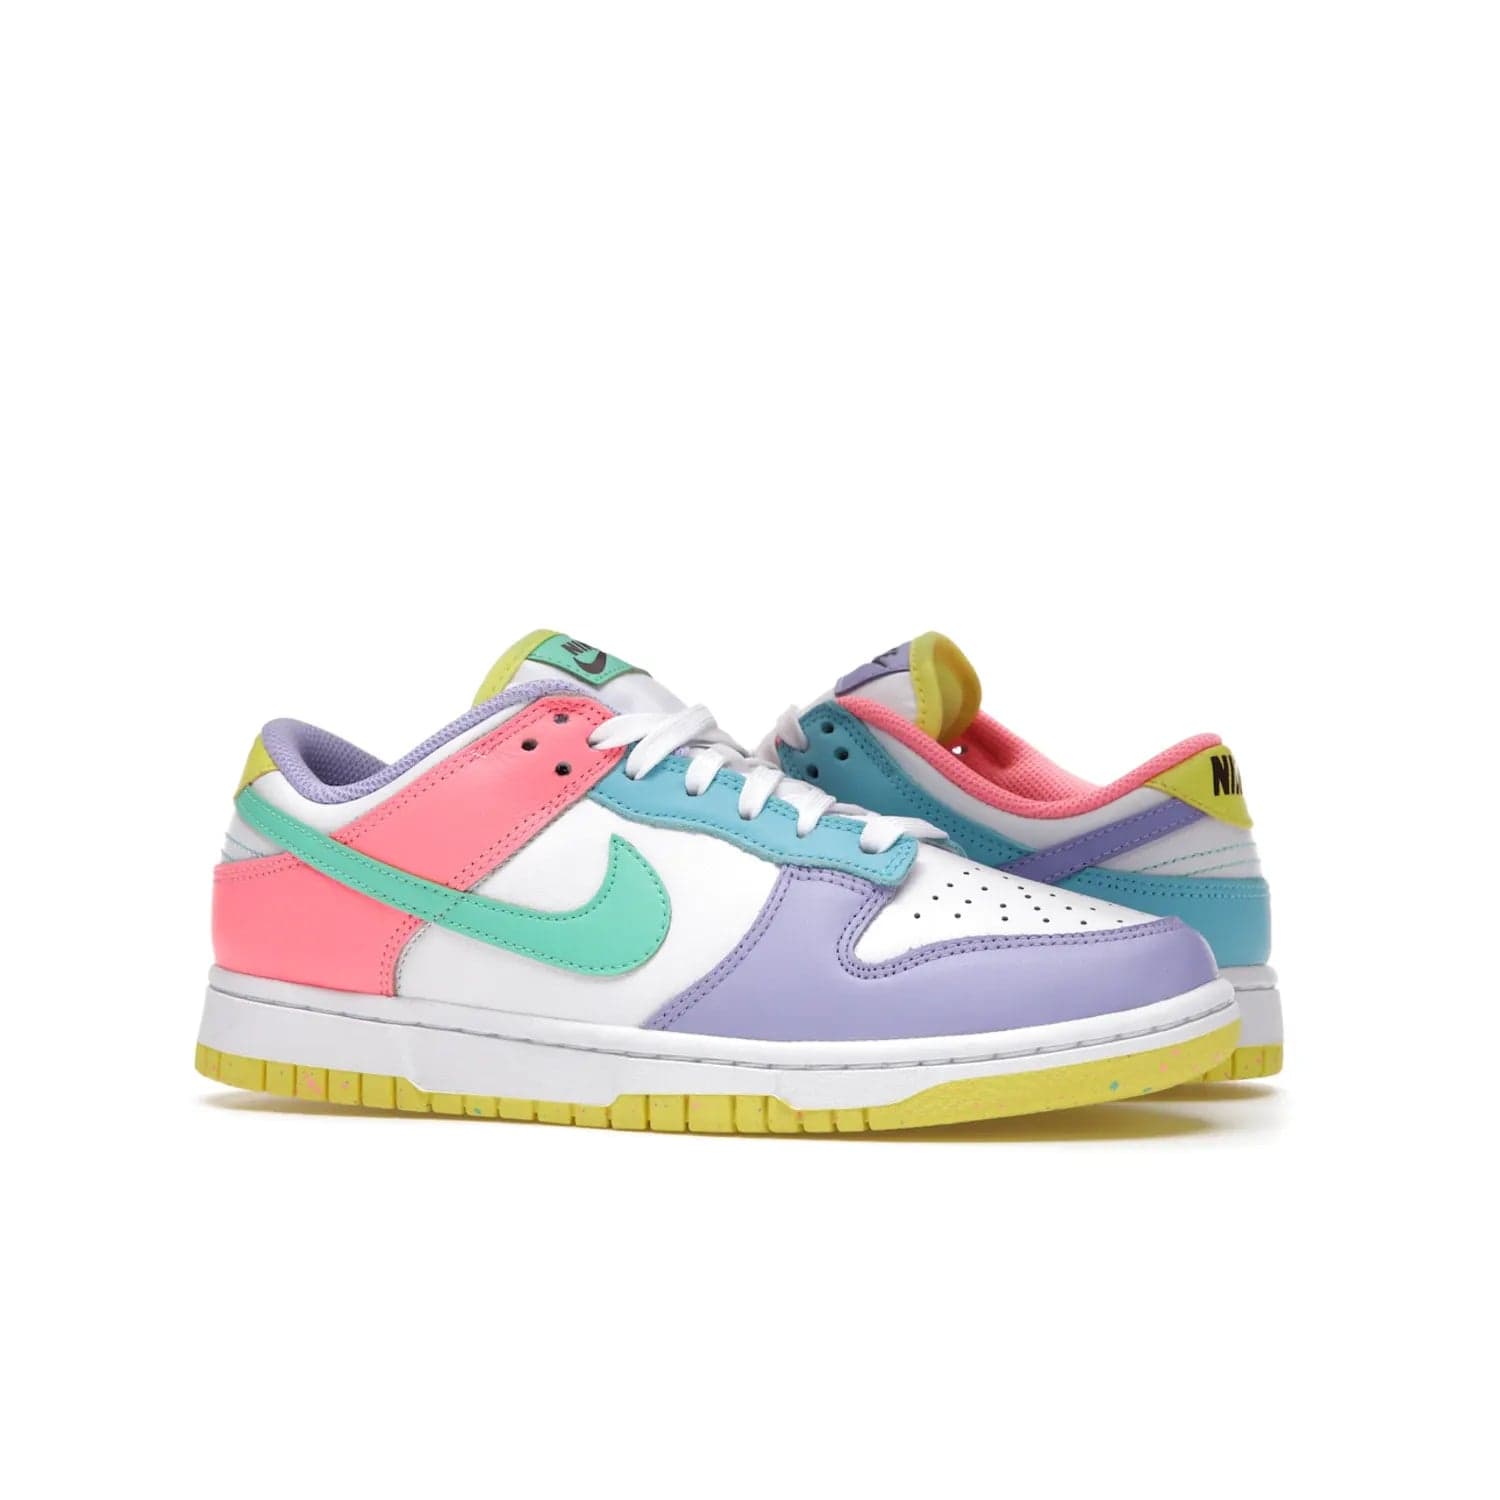 Nike Dunk Low SE Easter Candy (Women's) - Image 3 - Only at www.BallersClubKickz.com - UP
The Nike Dunk Low SE Easter Candy (Women's) brings a stylish touch to any outfit with its white leather upper, colorful accents, and multicolor speckle detailing. Shop now before they're gone.